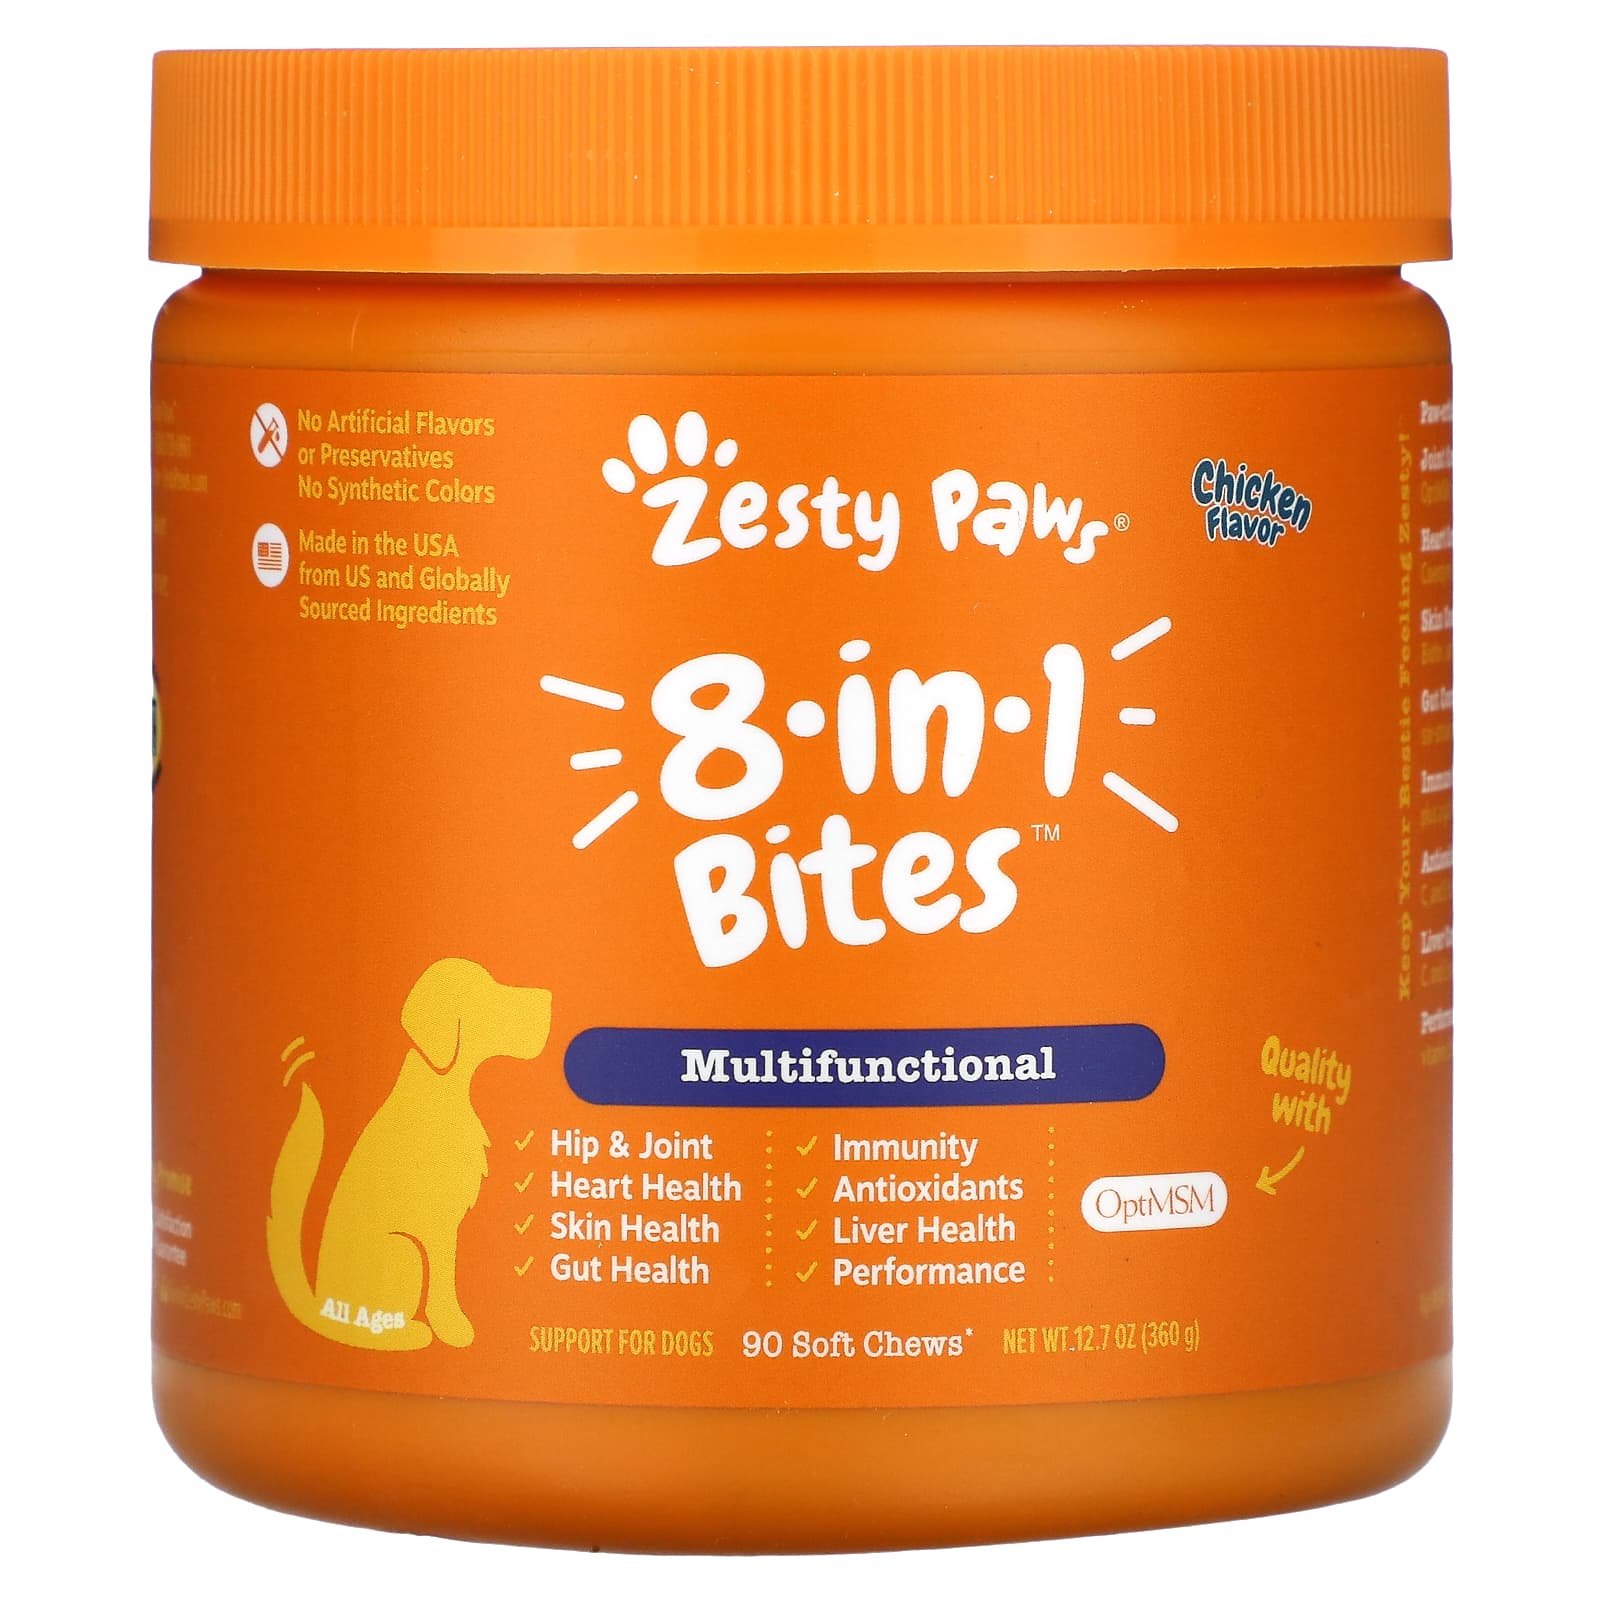 Zesty Paws, 8-in-1 Bites for Dogs, Multifunctional, All Ages, Chicken ...